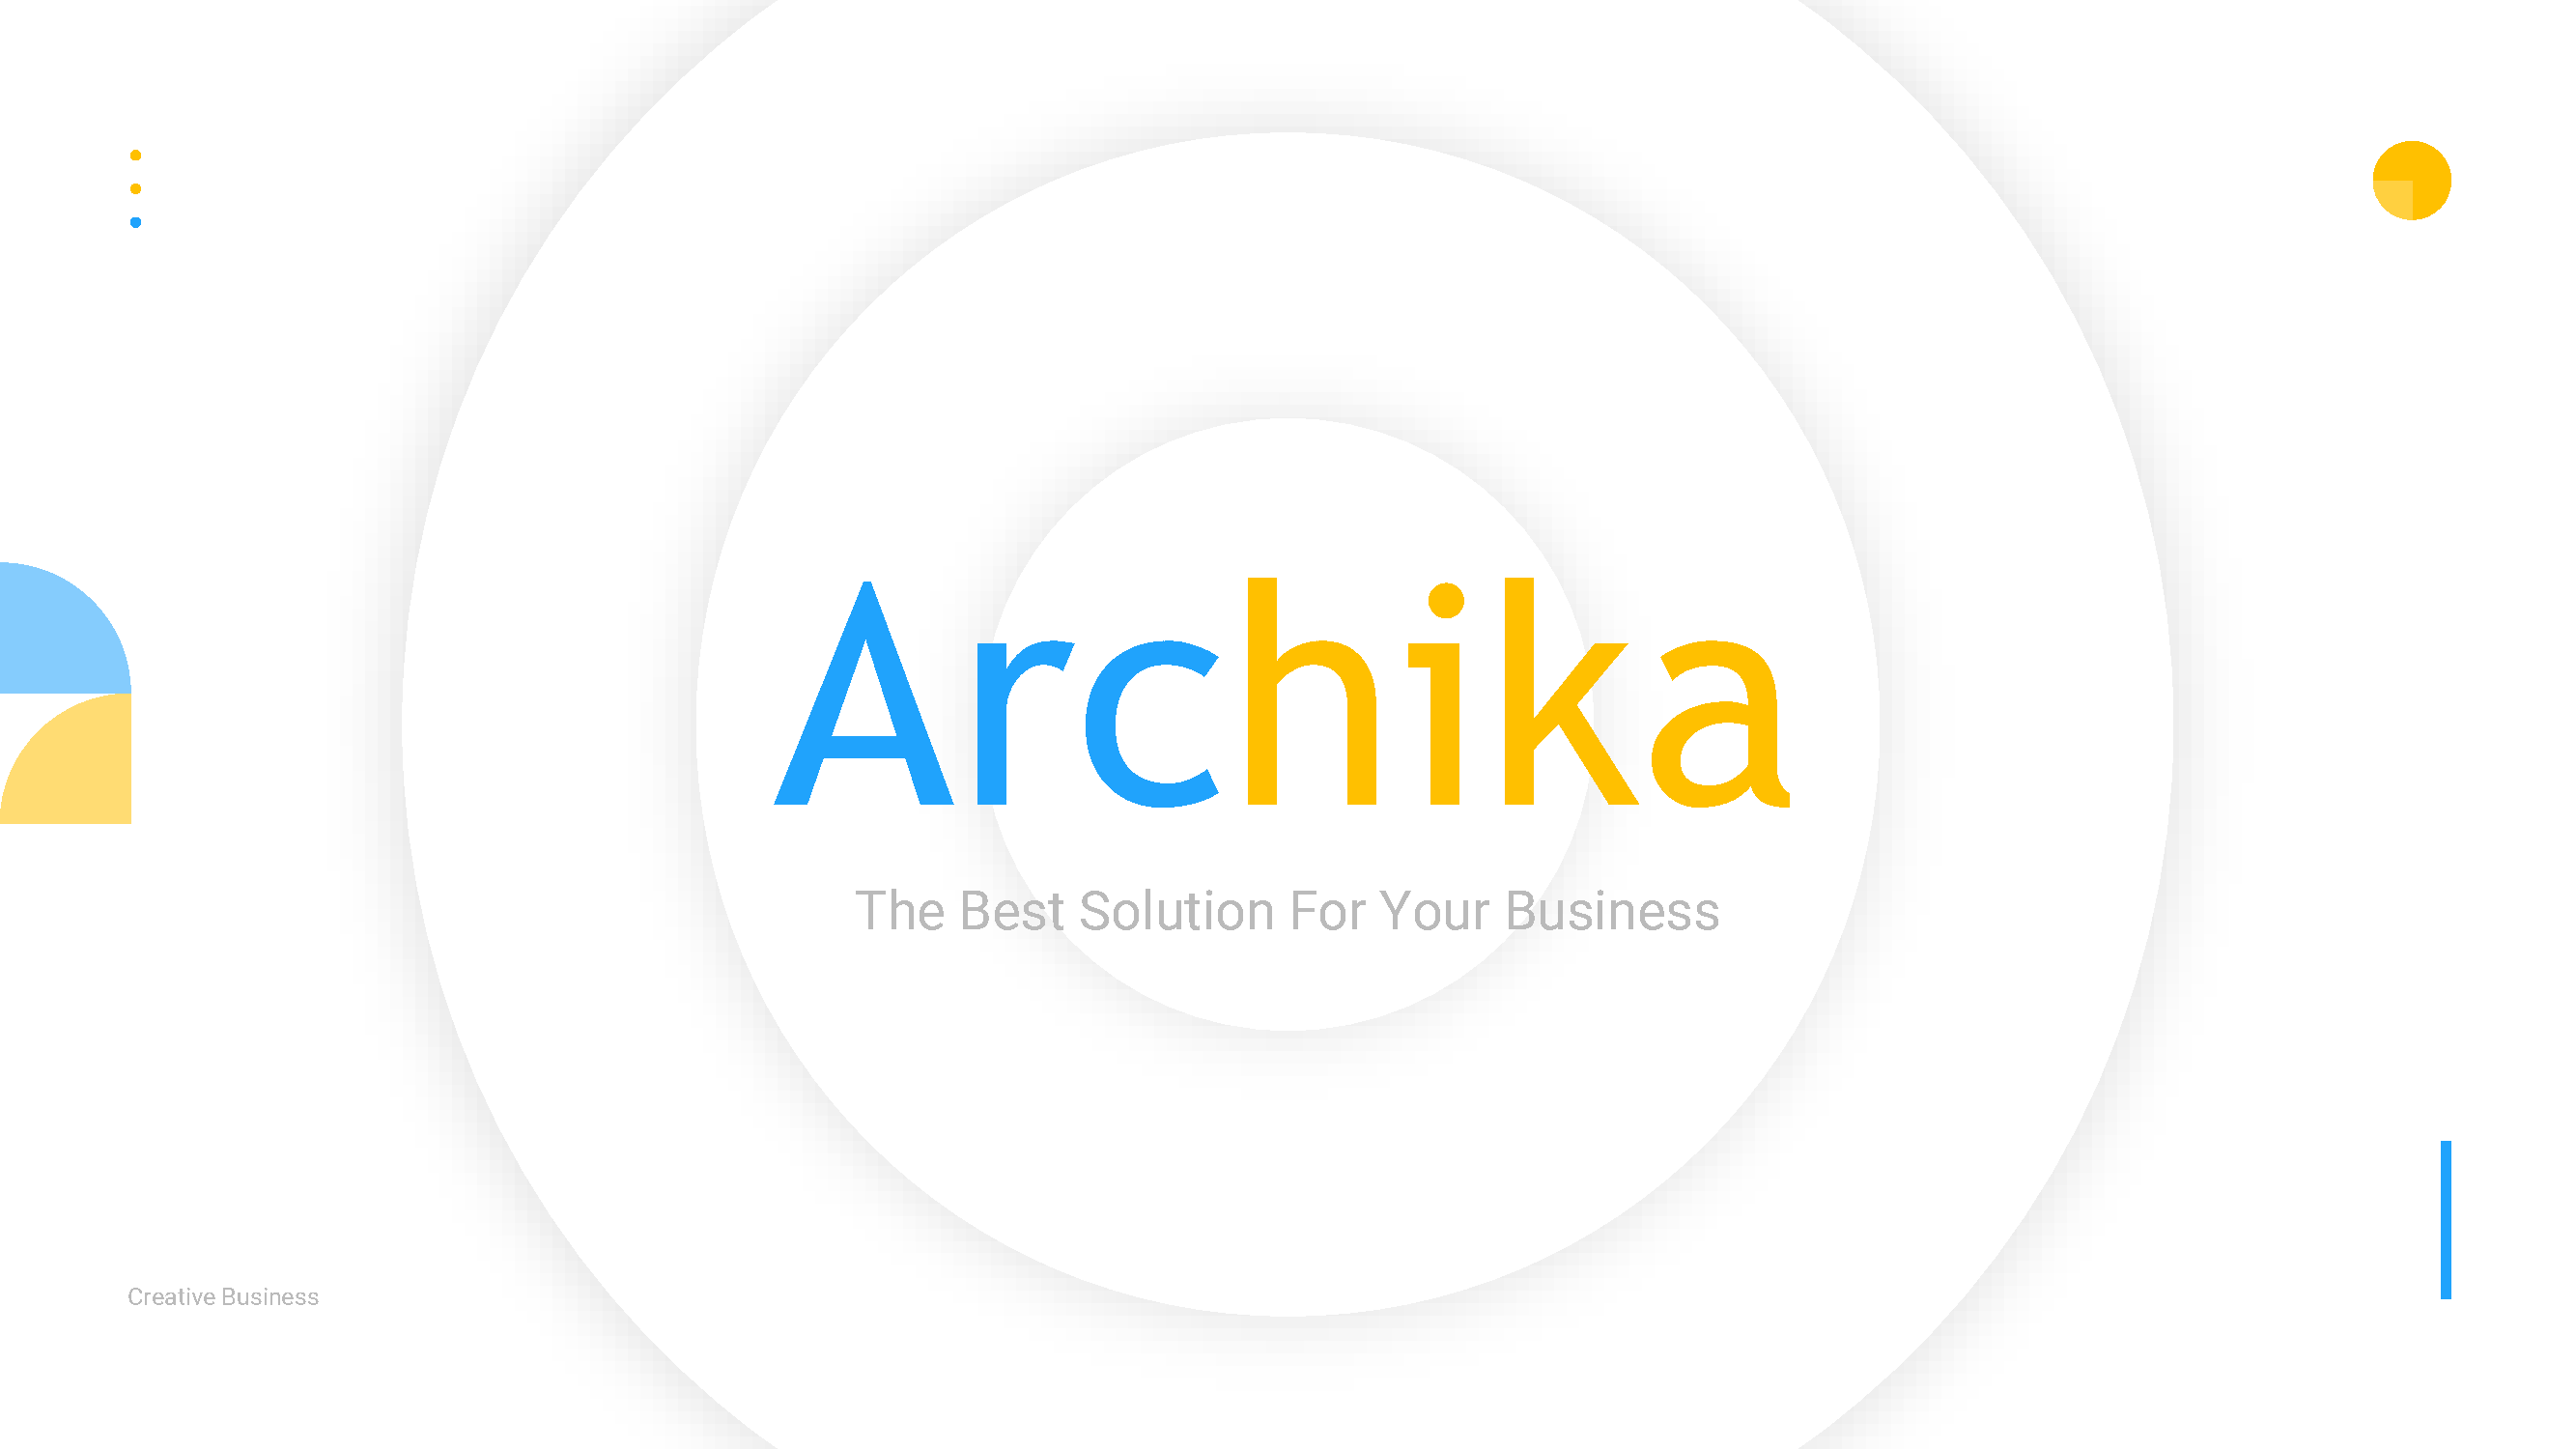 archika-business-consulting-powerpoint-template-GBTVBAM